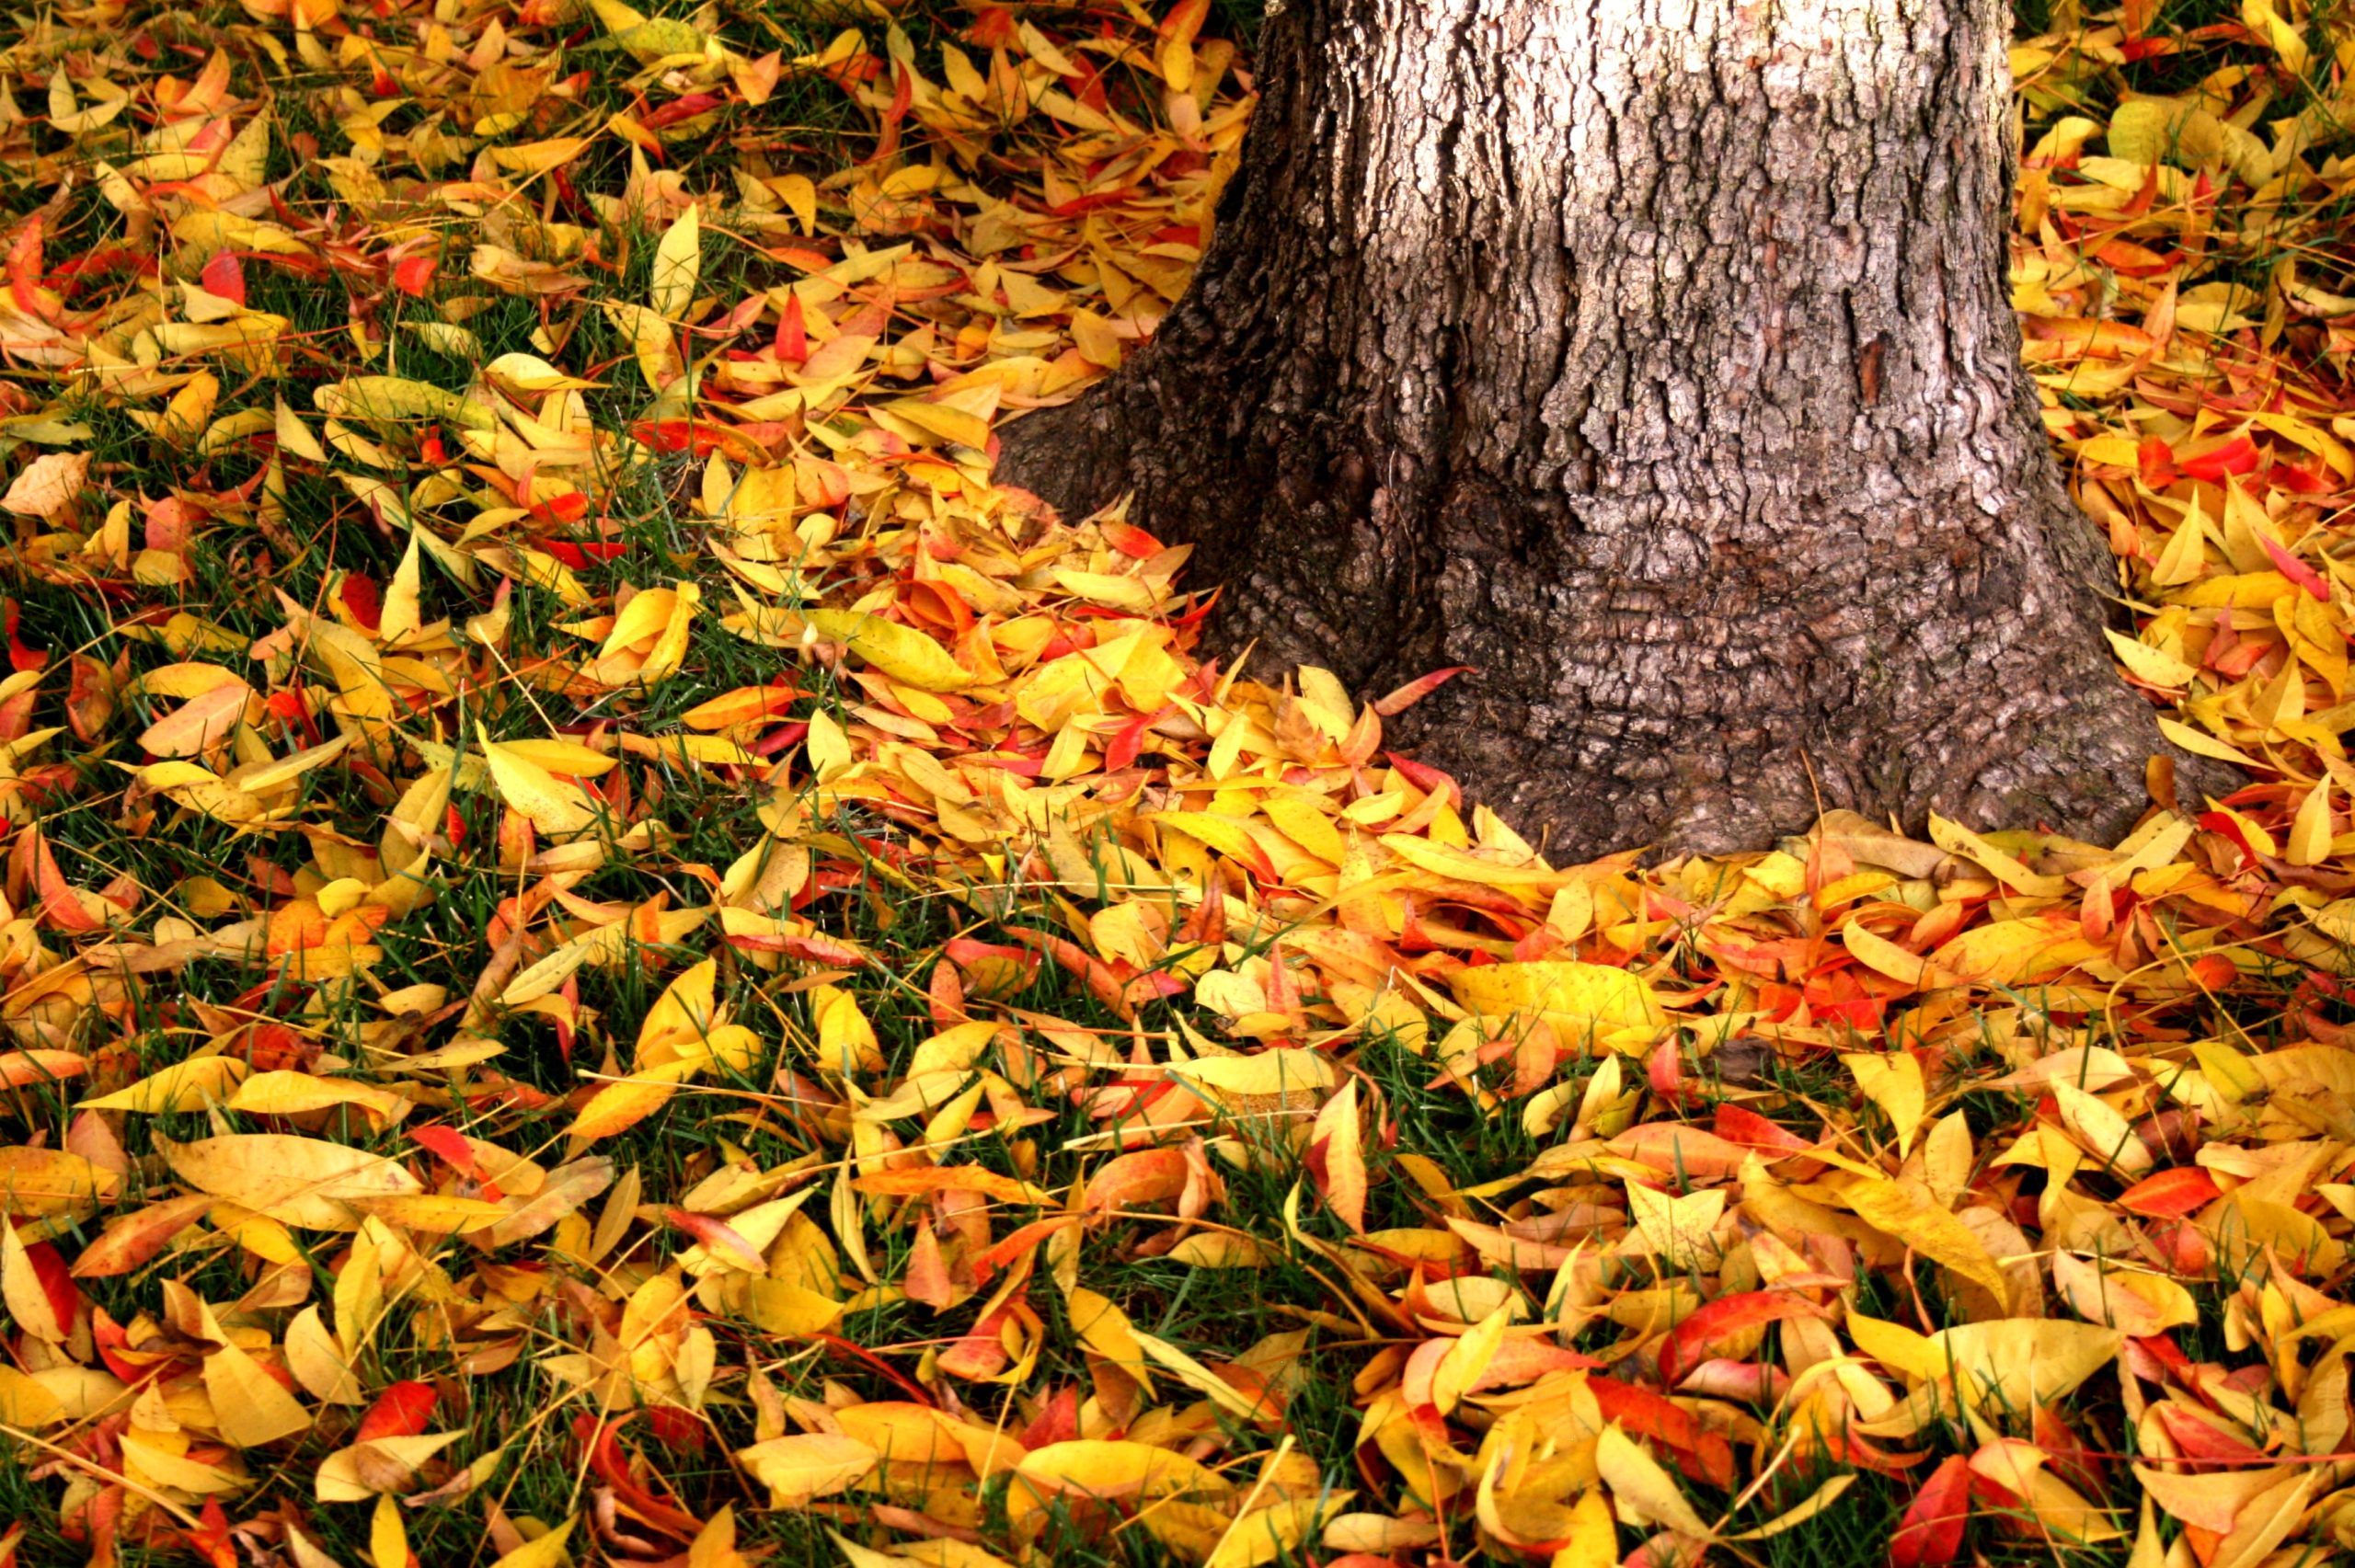 Johnson City leaf collection service to begin November 1 99.3 The X